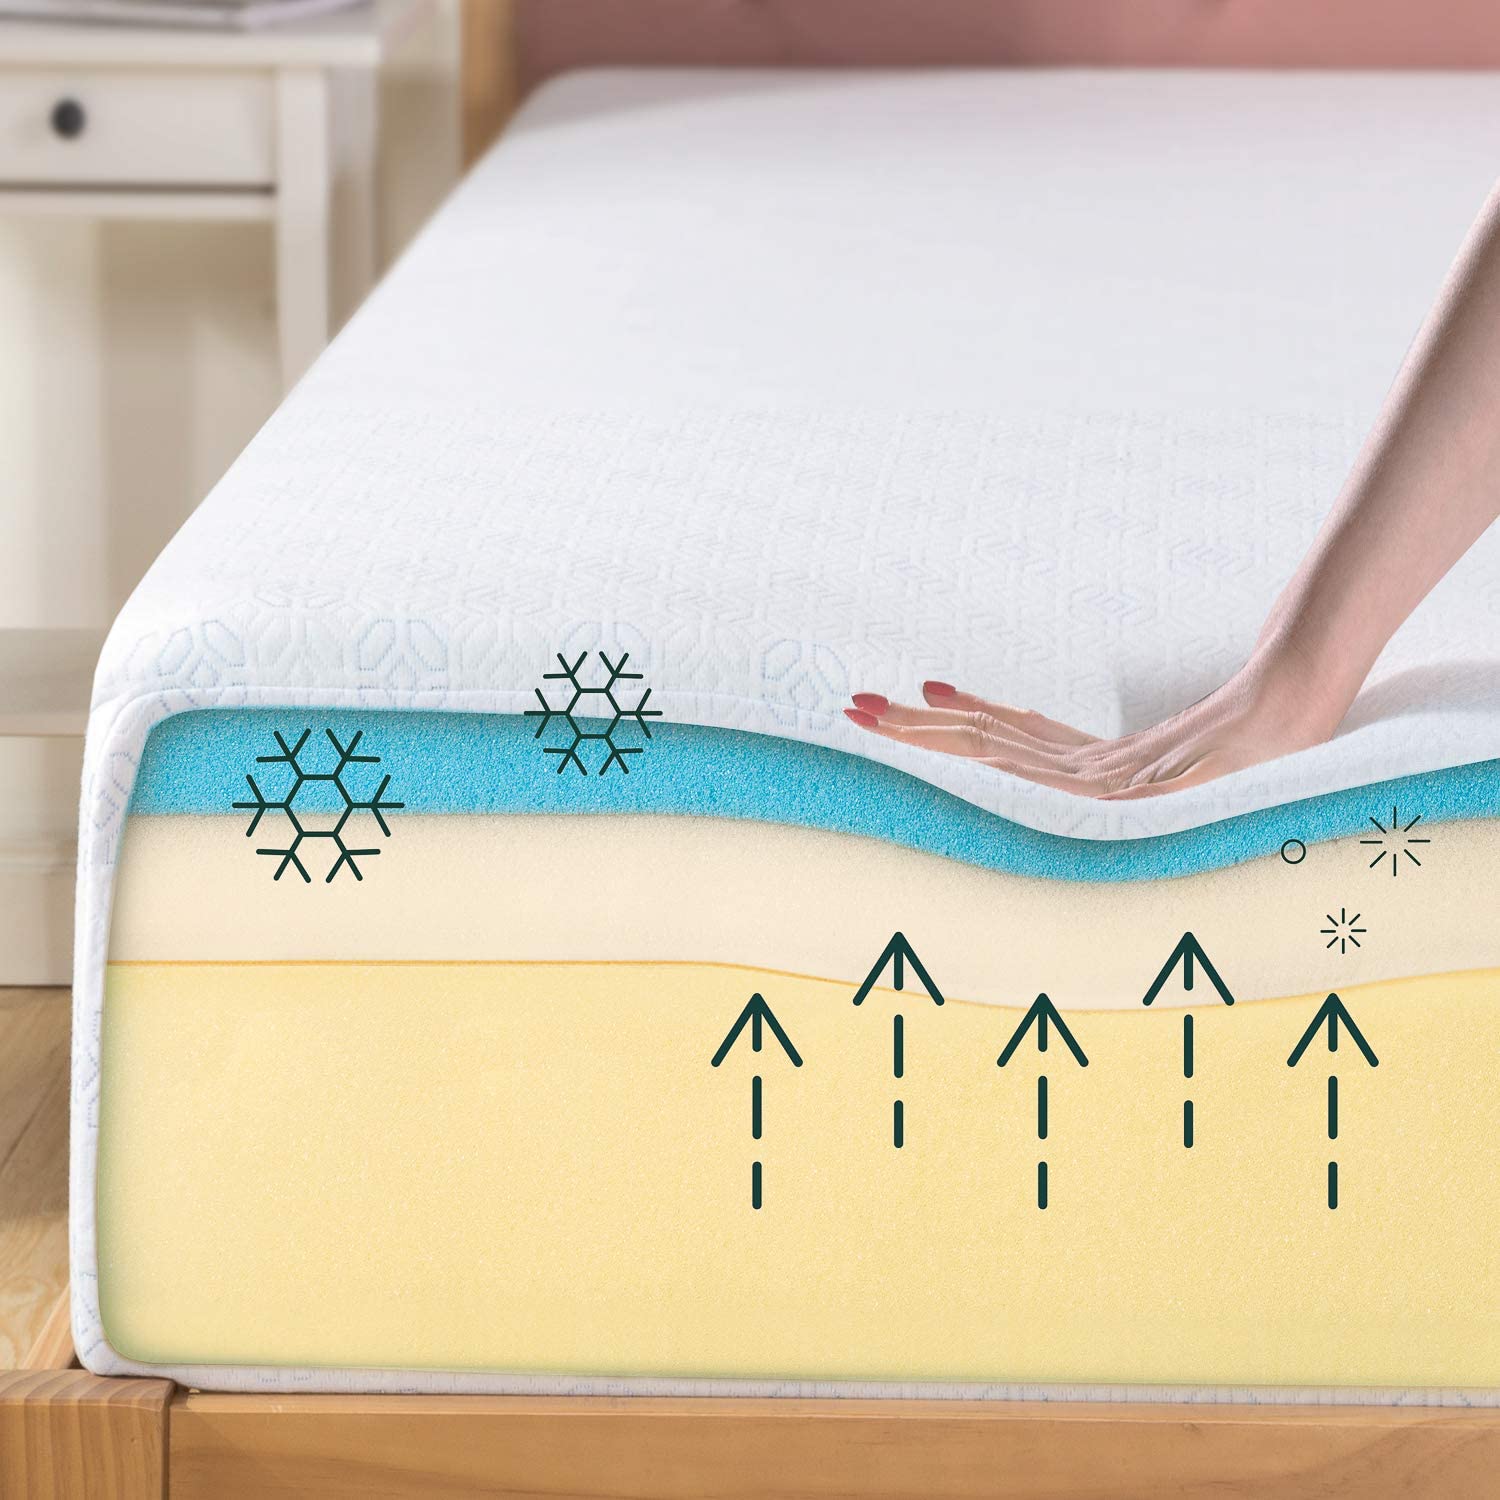 A breathable mattress like this will allow for effective temperature regulation for hot sleepers.